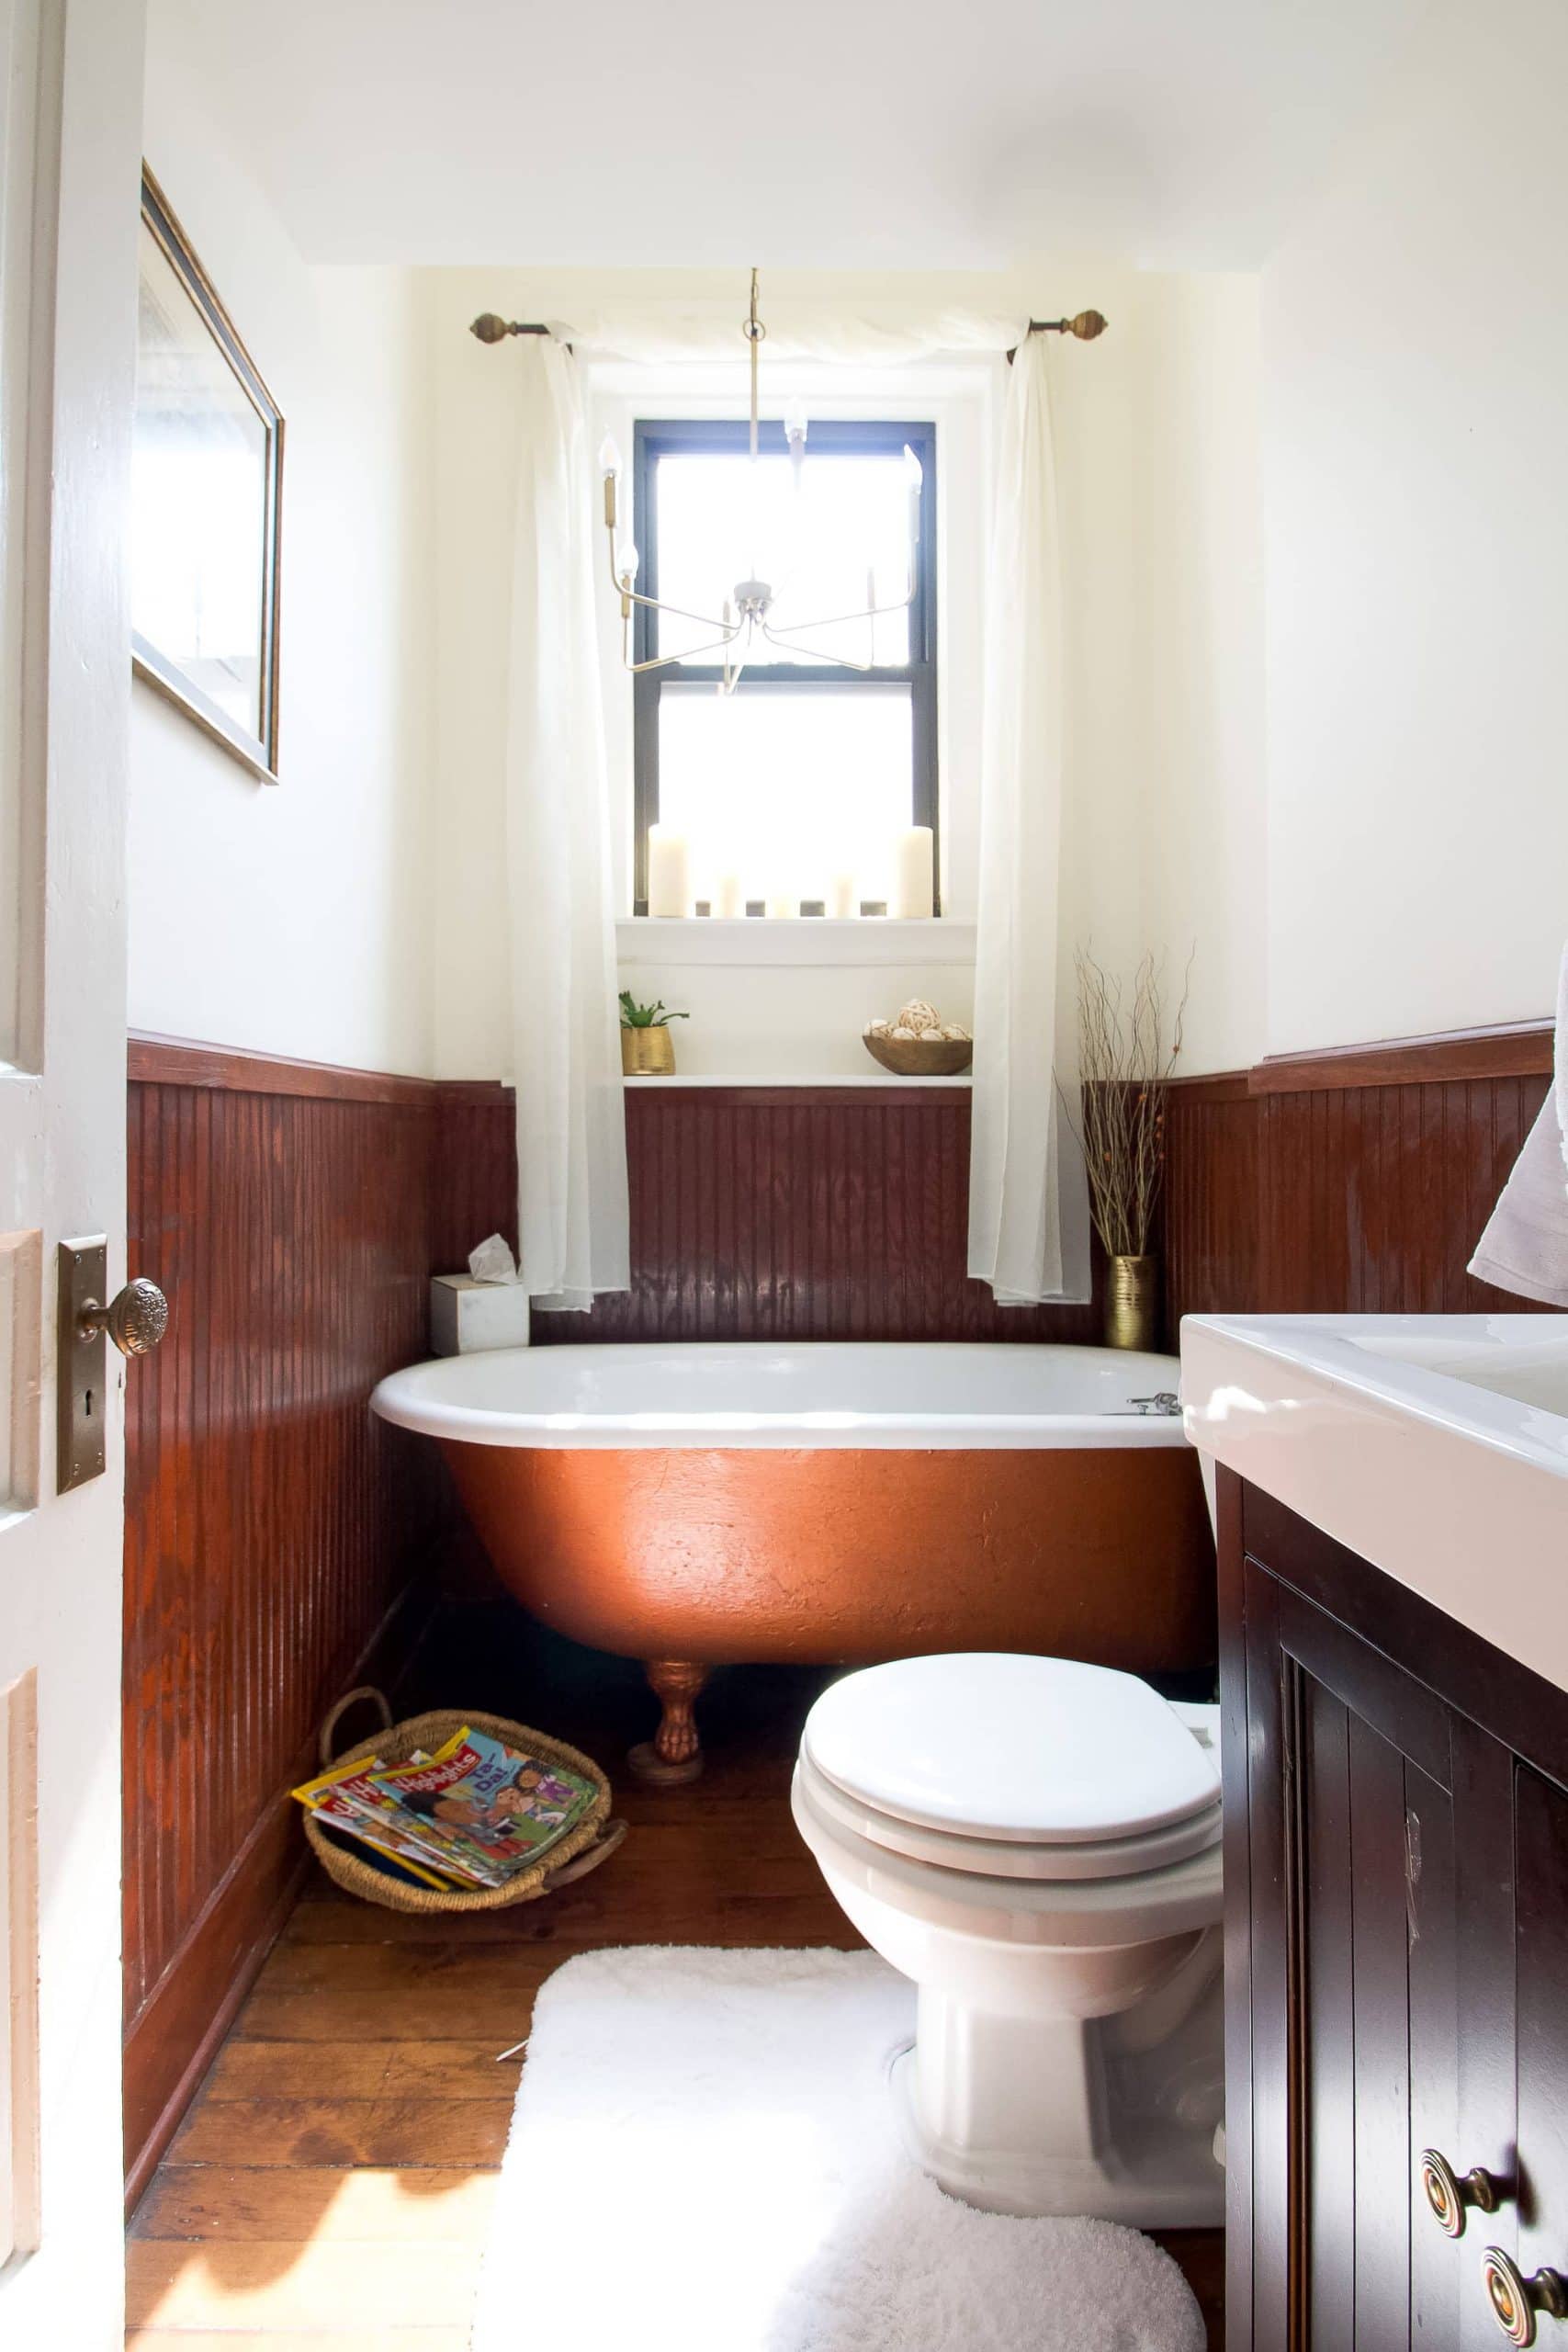 An original clawfoot tub in this historic home